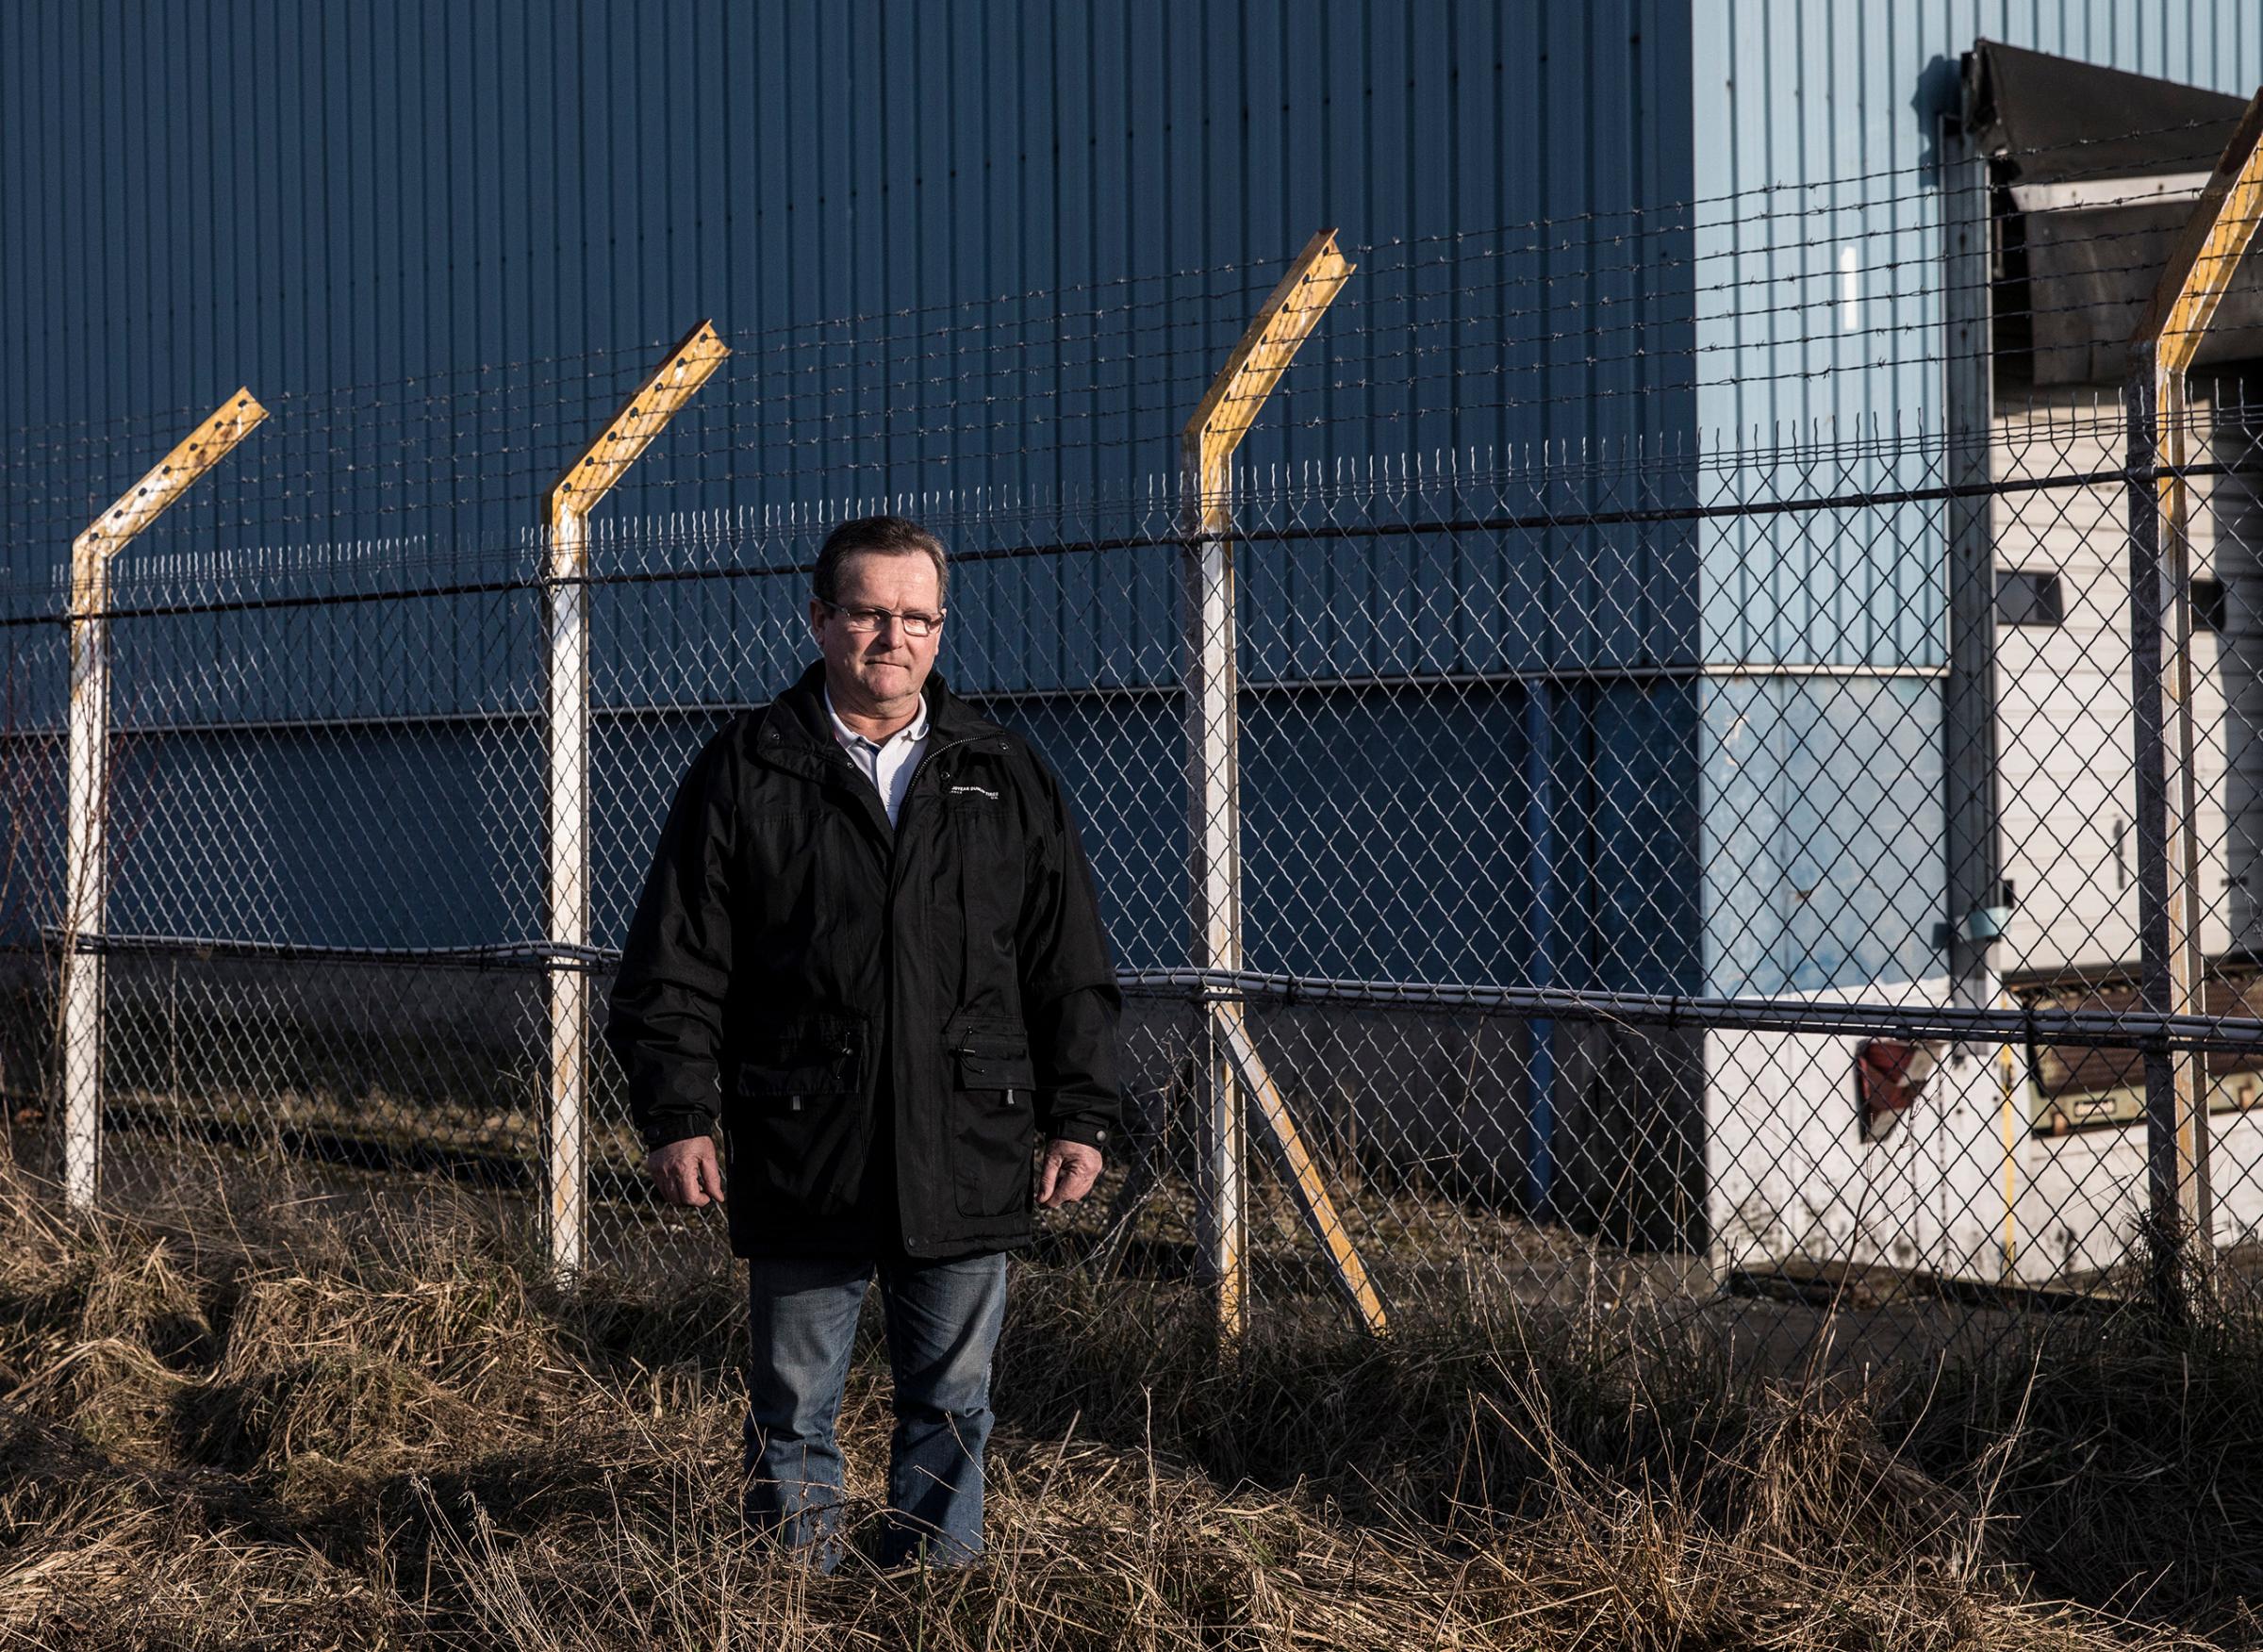 Alain Dupuis, 64, former Goodyear worker in Amiens, until it closed in 2014 after a violent battle between activists and police. Now the mayor of the tiny village of Bourdon, he is standing in front of the now-deserted Goodyear plant. "I am still thinking who to vote for. I have voted Socialist since 1981, but I've very disappointed with the left. More and more people in my village support Marine Le Pen. I think the National Front is still deeply racist."